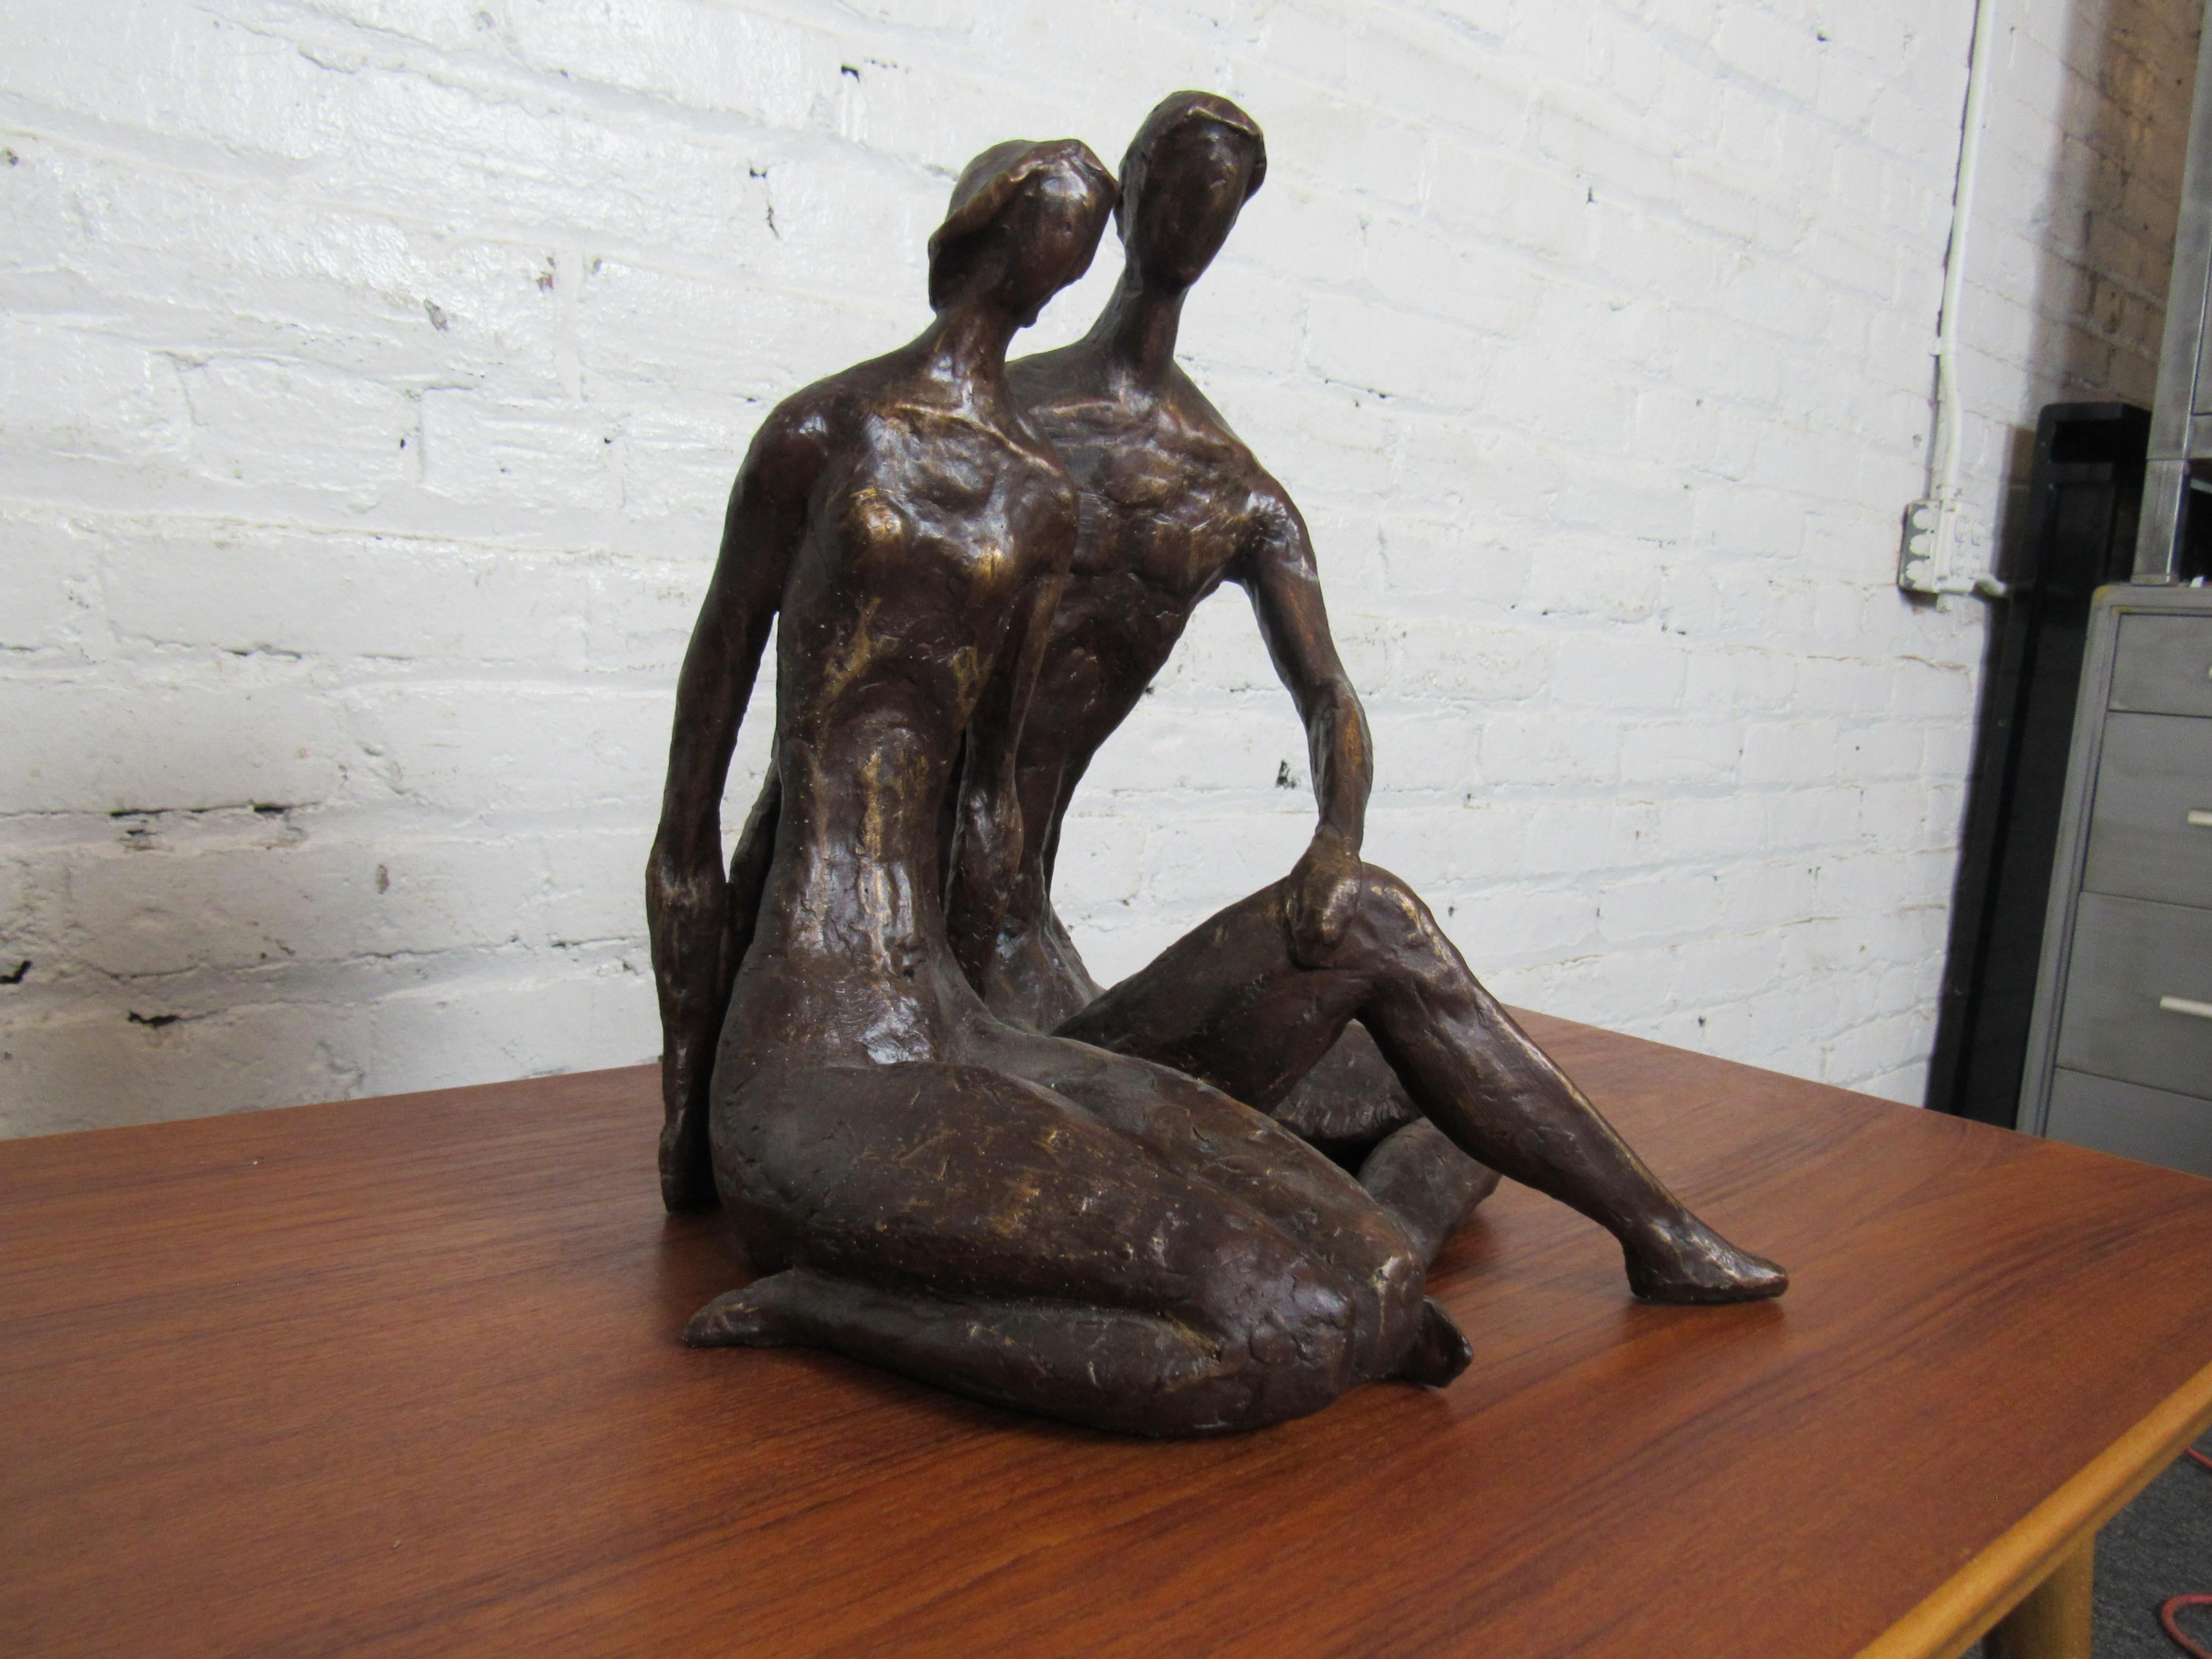 This table sculpture would make for a unique bookend or decoration on any shelf, table, or desk. Please confirm item location with seller (NY/NJ).